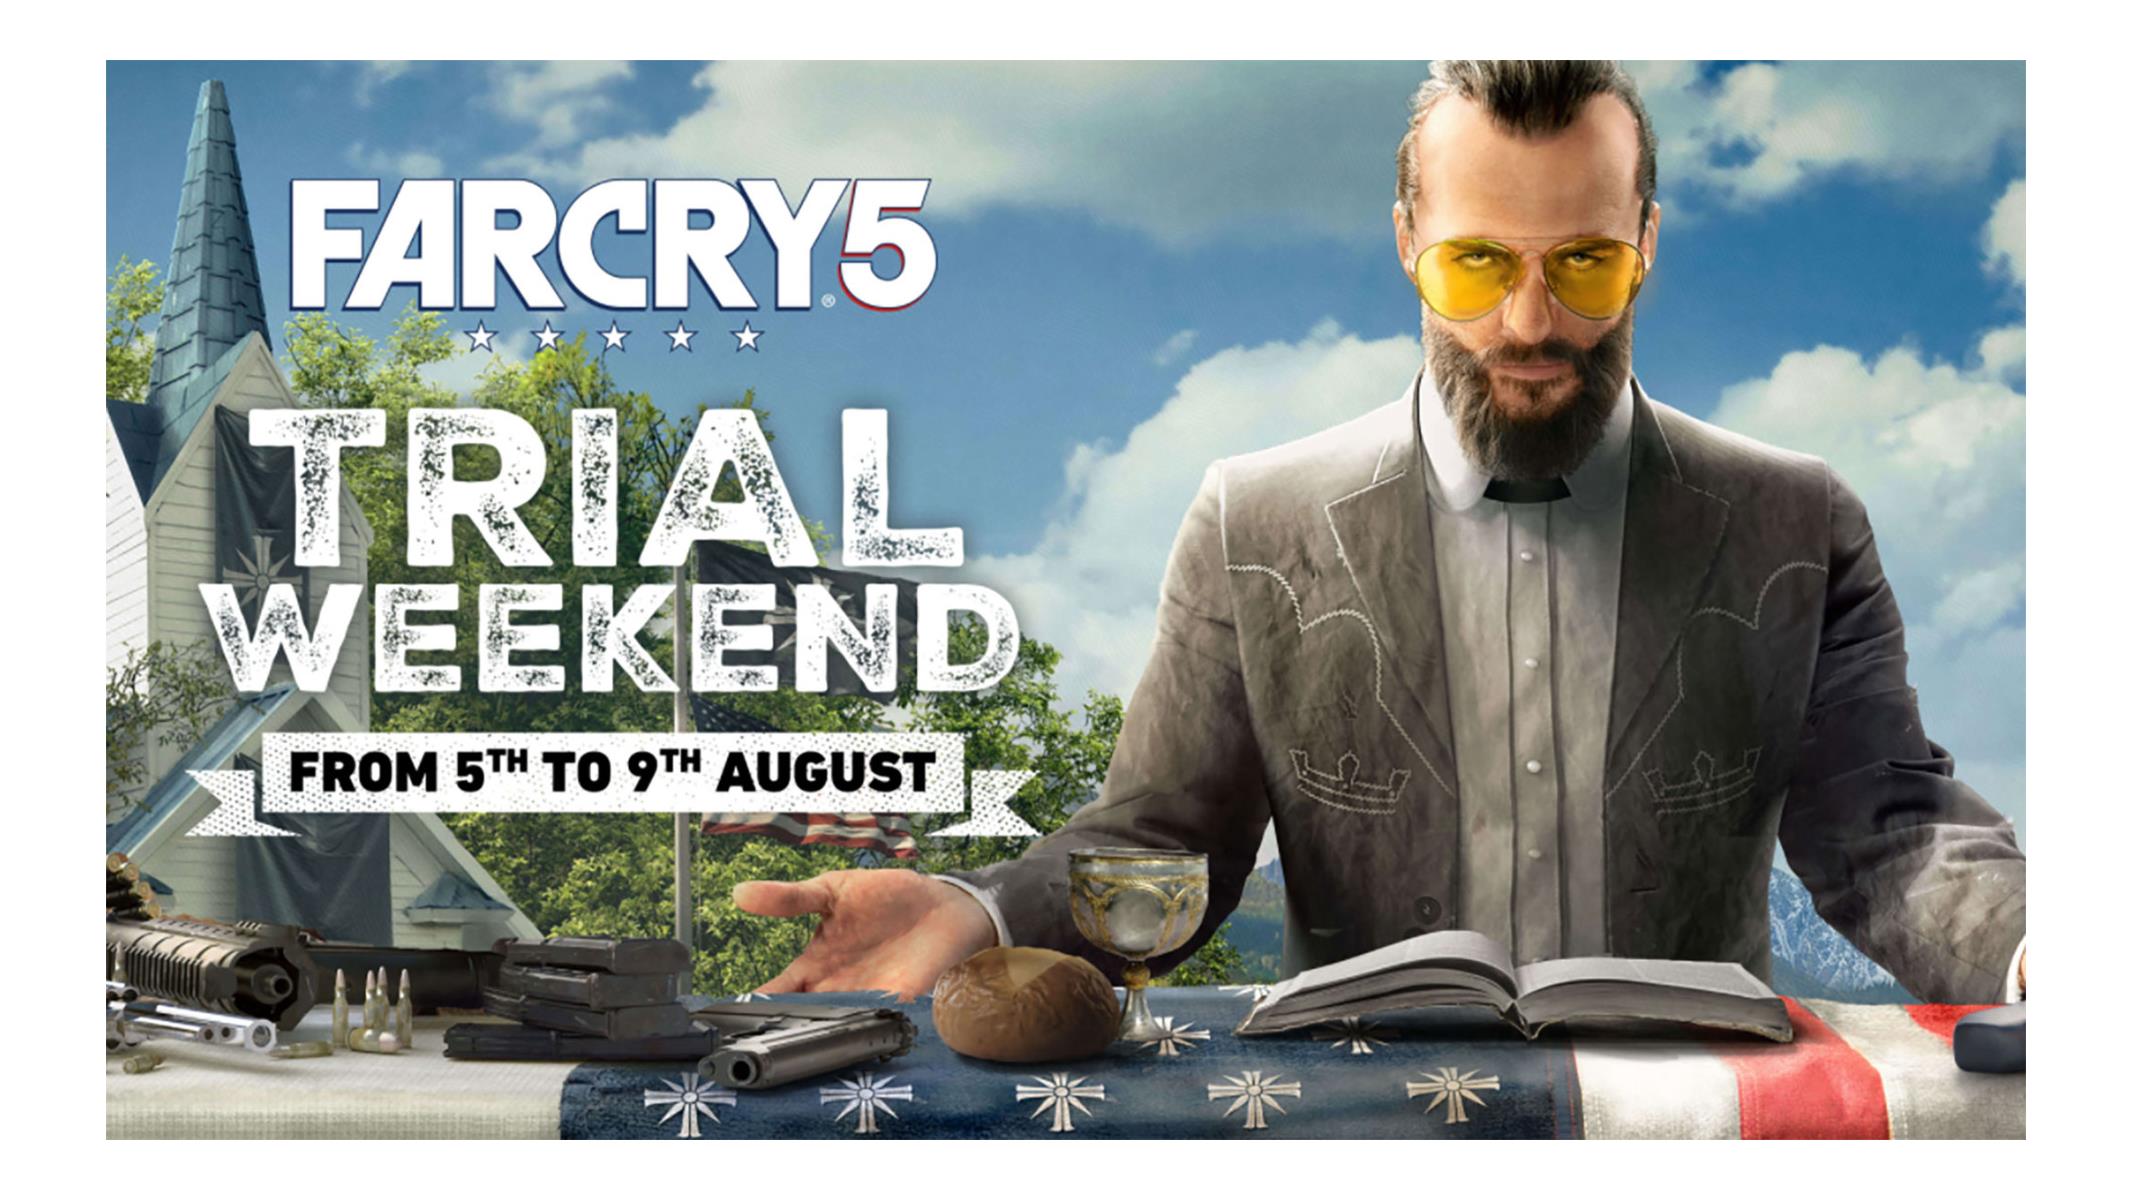 Far Cry 5 Is Going Free-To-Play For A Limited Time, Download Now